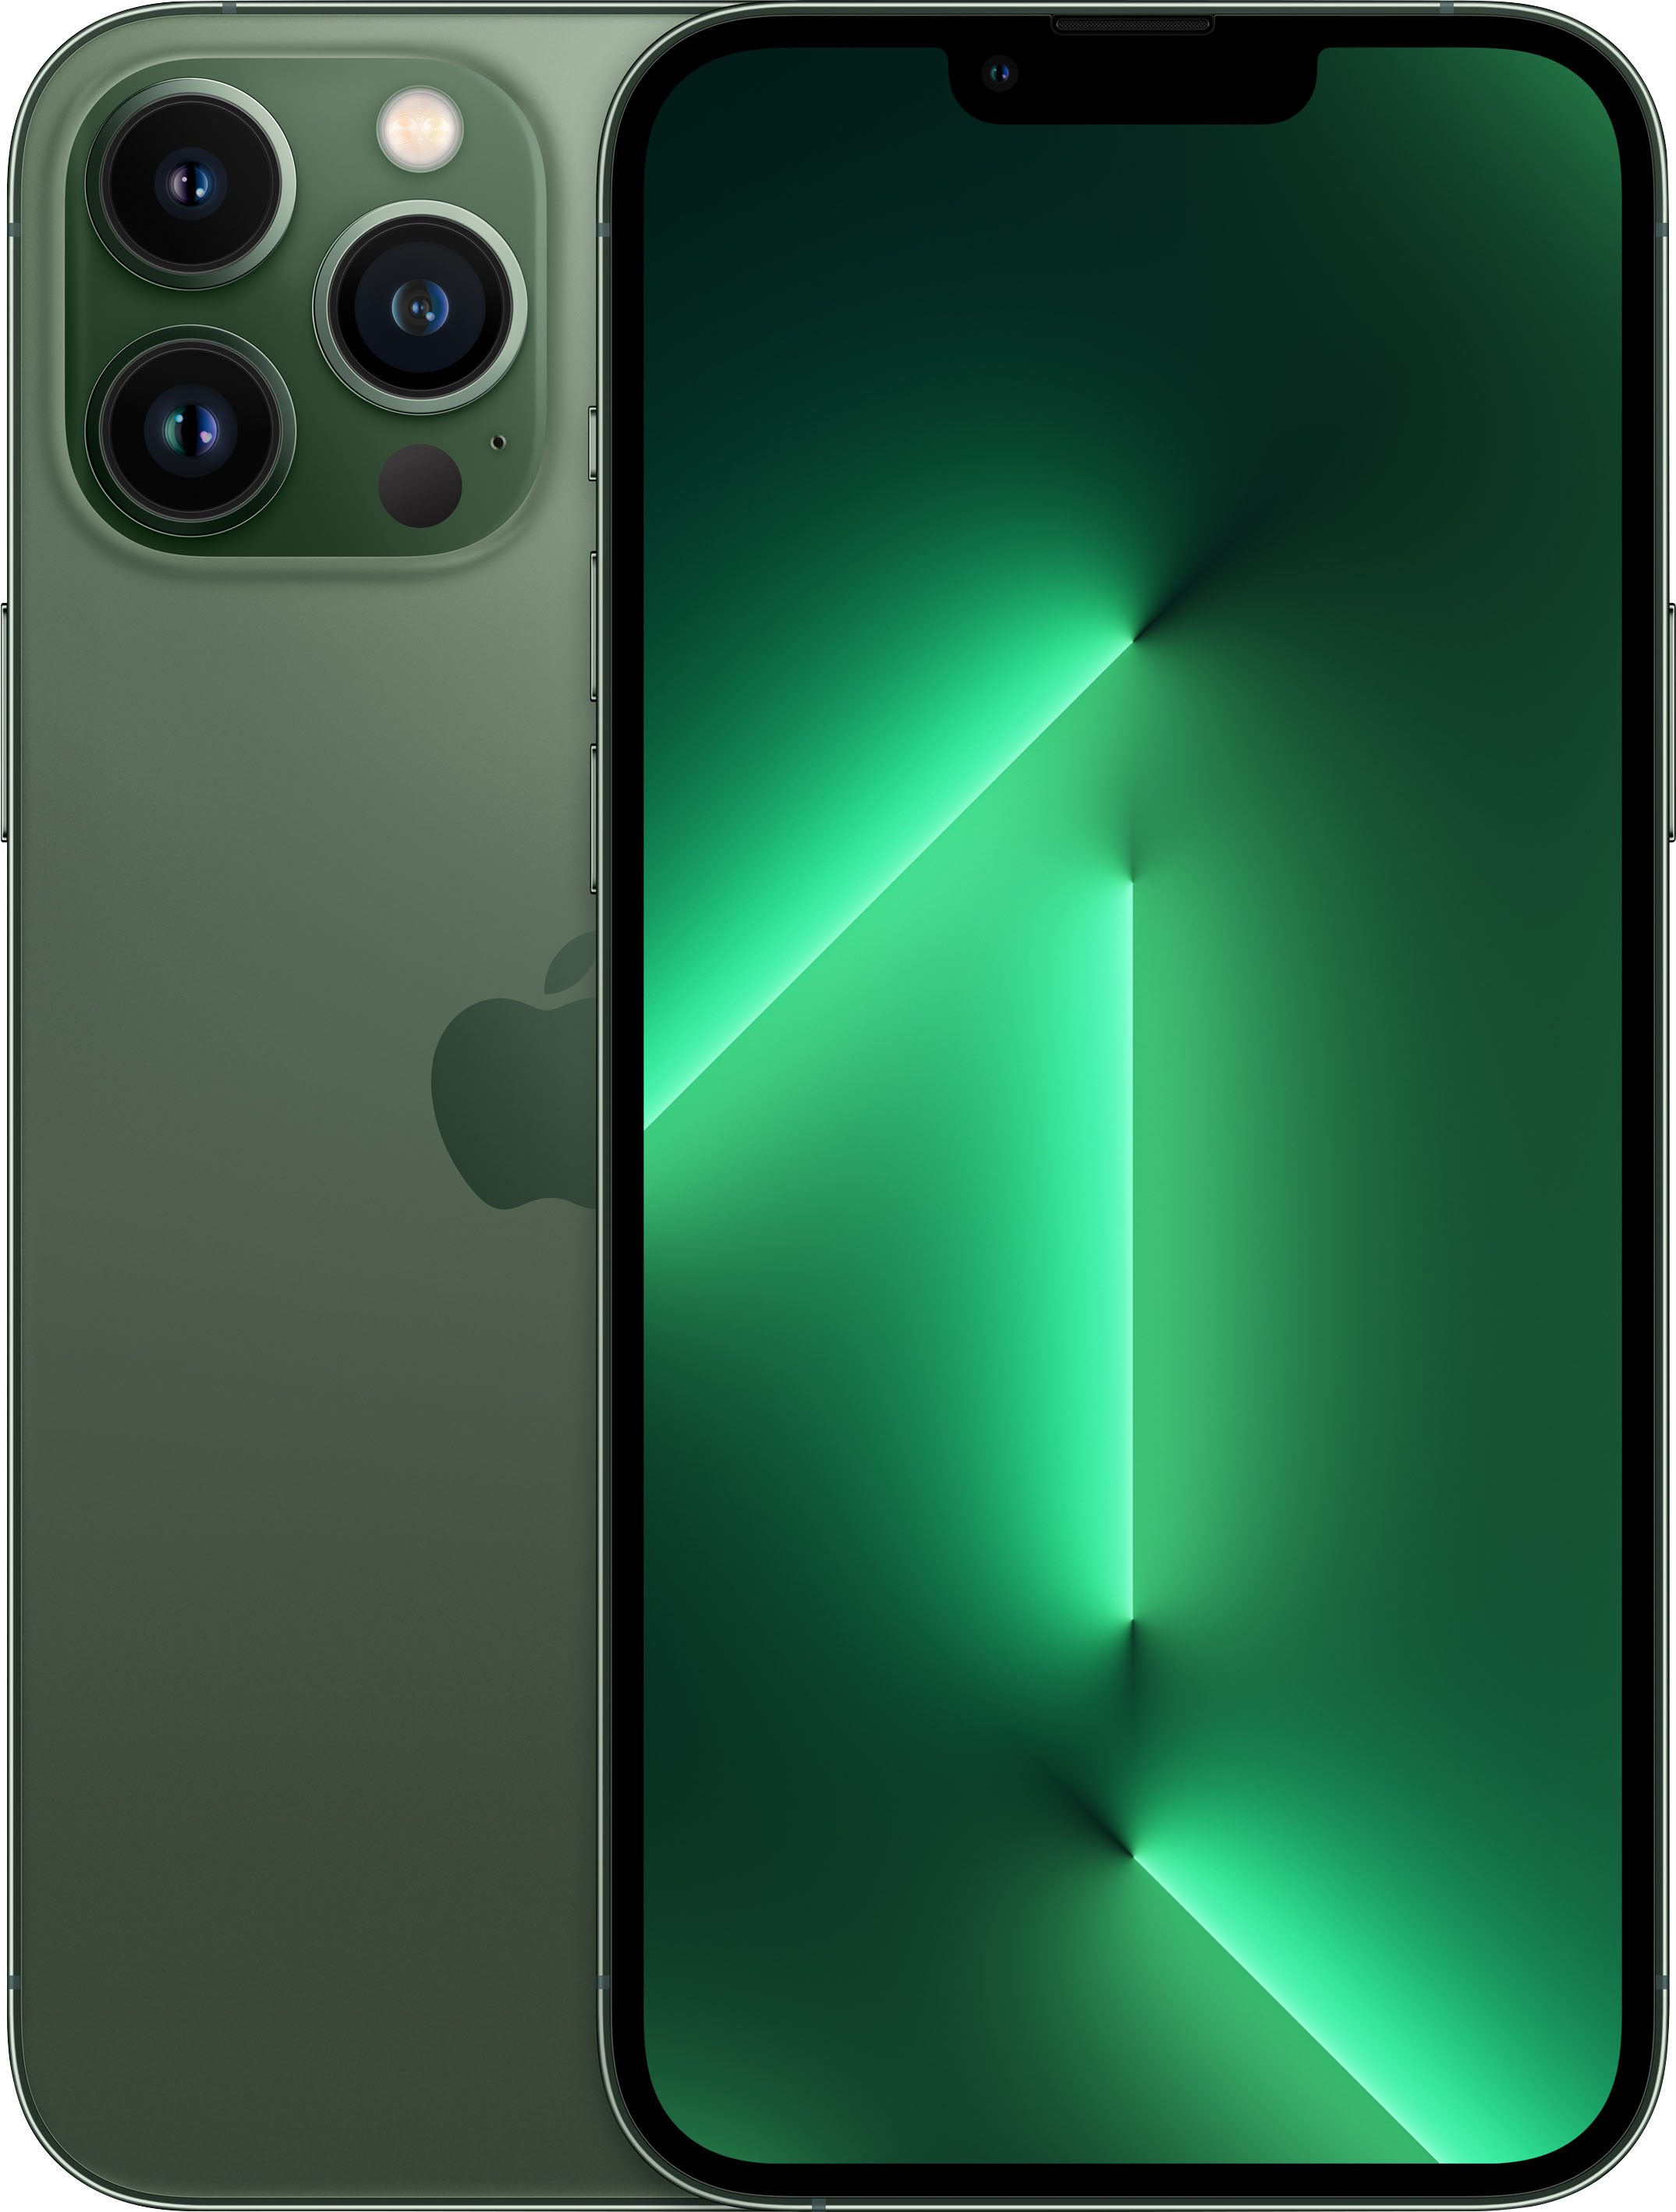 The iPhone 13 and 13 Pro Each Get a Snazzy New Green Color Option - CNET